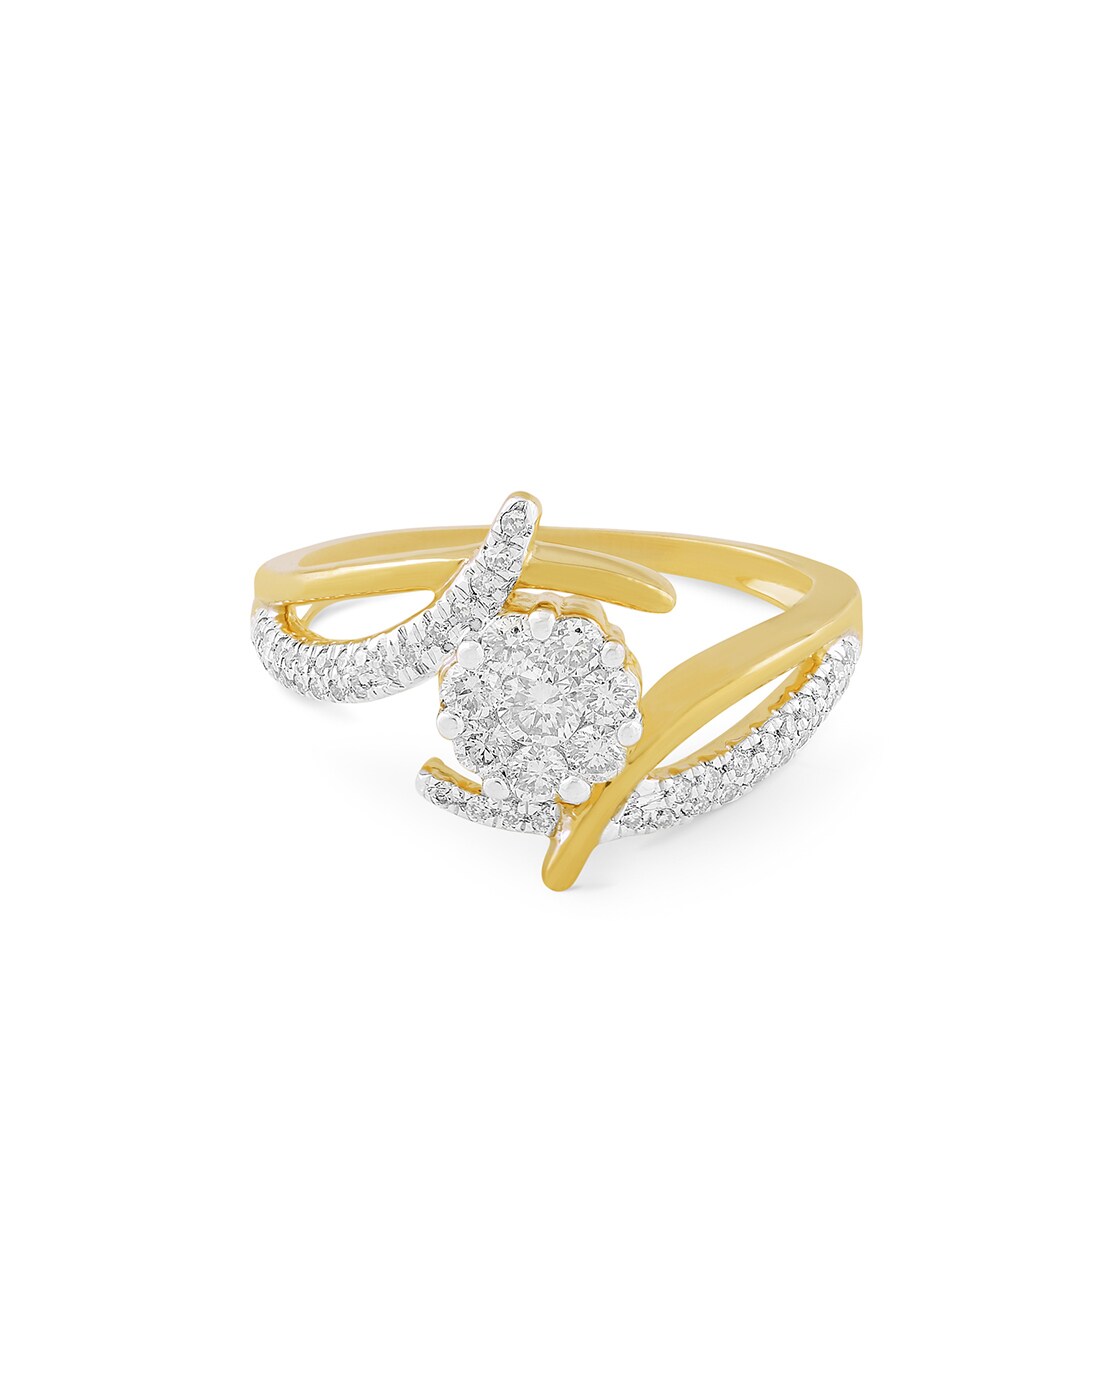 Buy Reliance Jewels 14KT Diamond Ring 1.23 g Online at Best Prices in India  - JioMart.